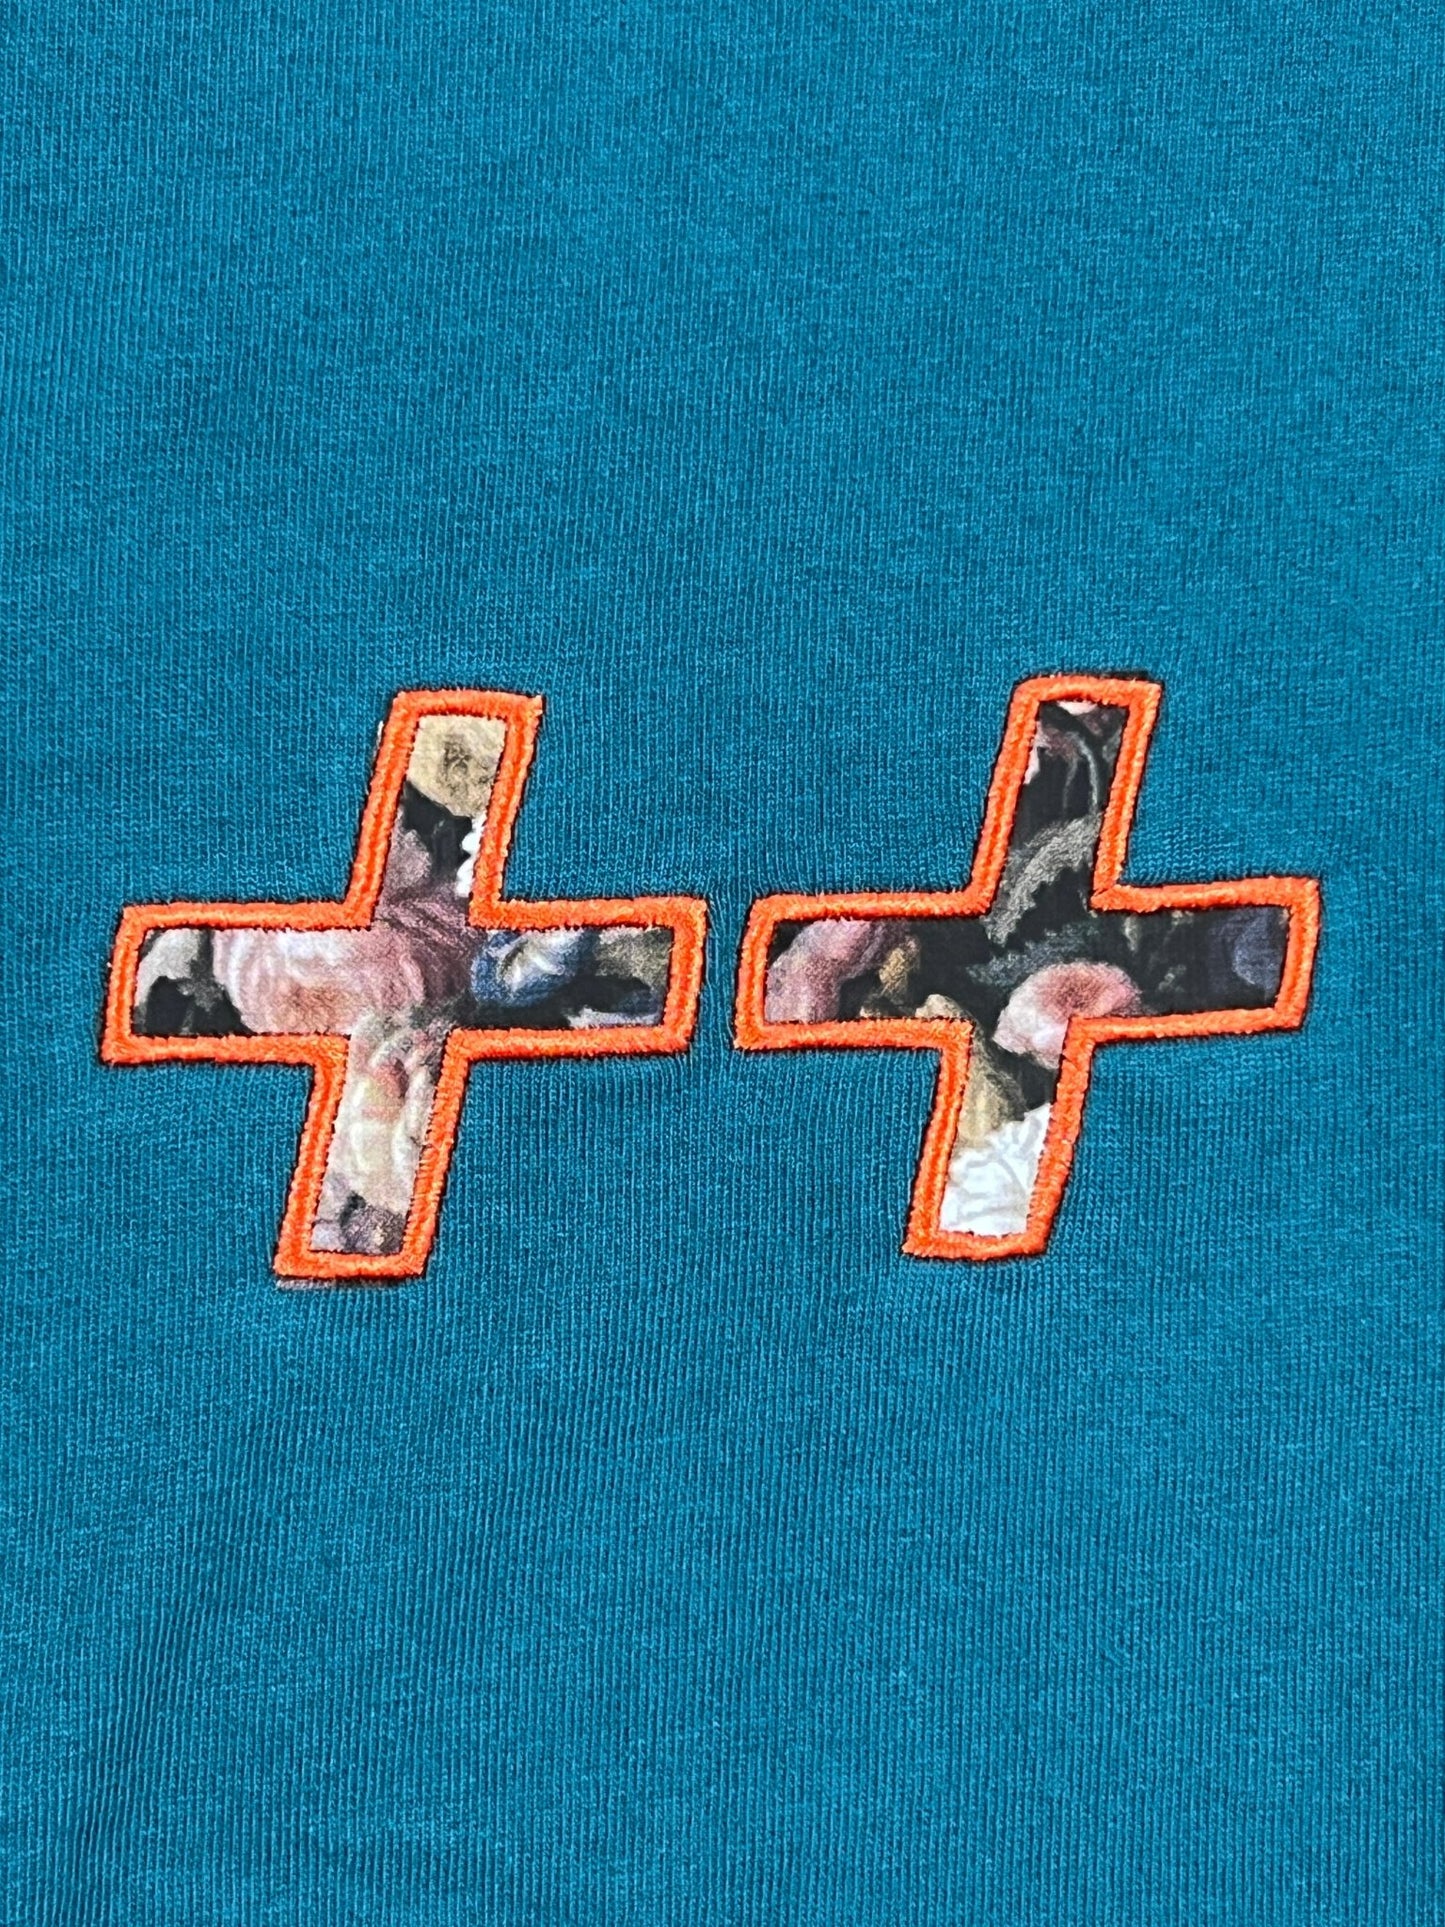 A KSUBI ECOLOGY BIGGIE SS TEE TEAL BLUE with two embroidered crosses on it.